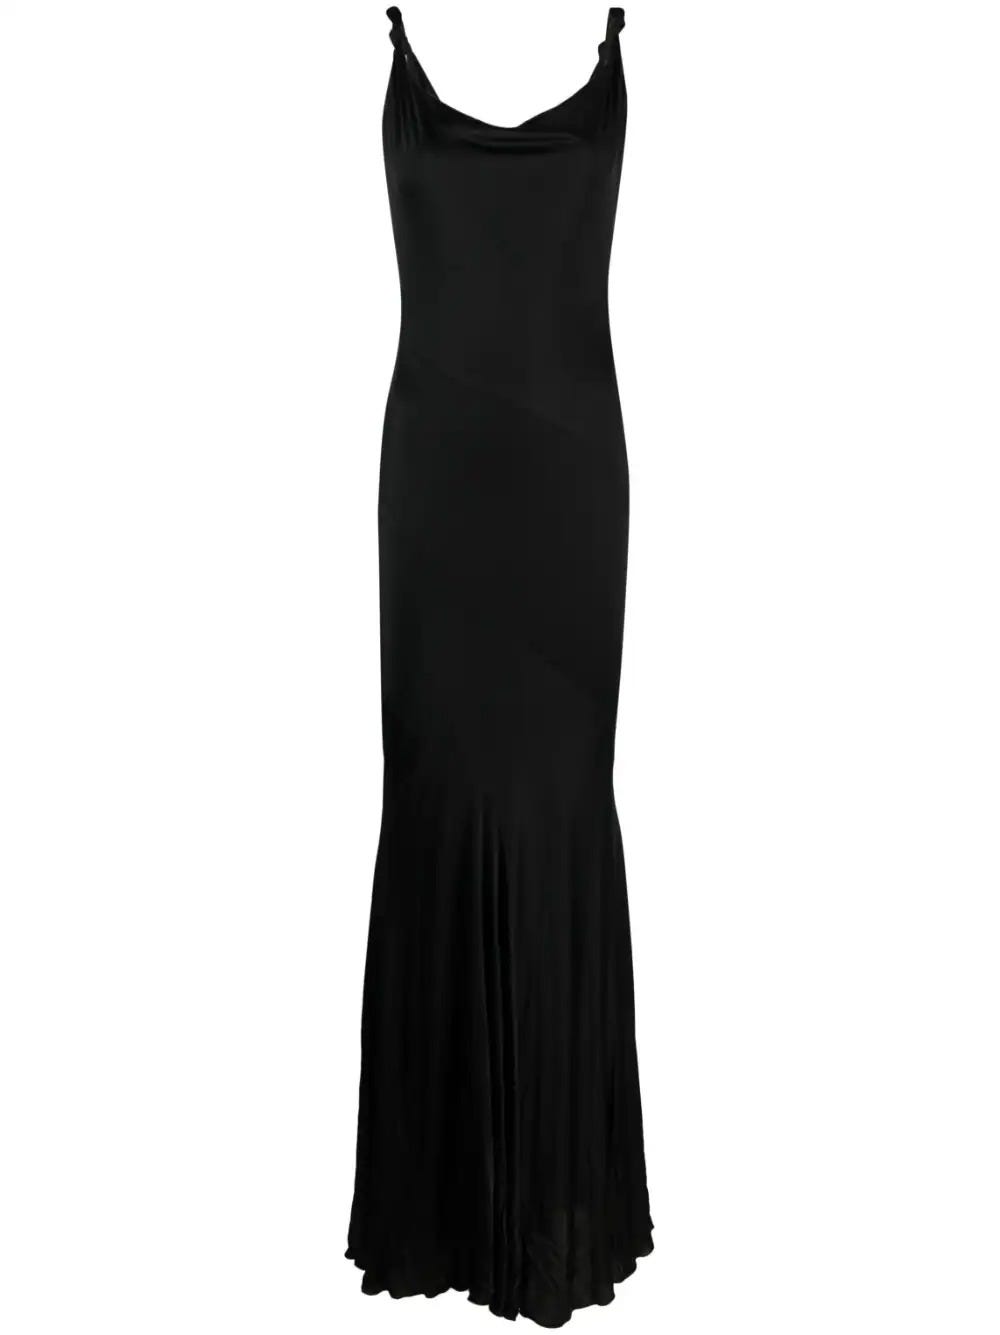 BLUMARINE BLACK LONG DRESS WITH KNOT ON THE STRAPS